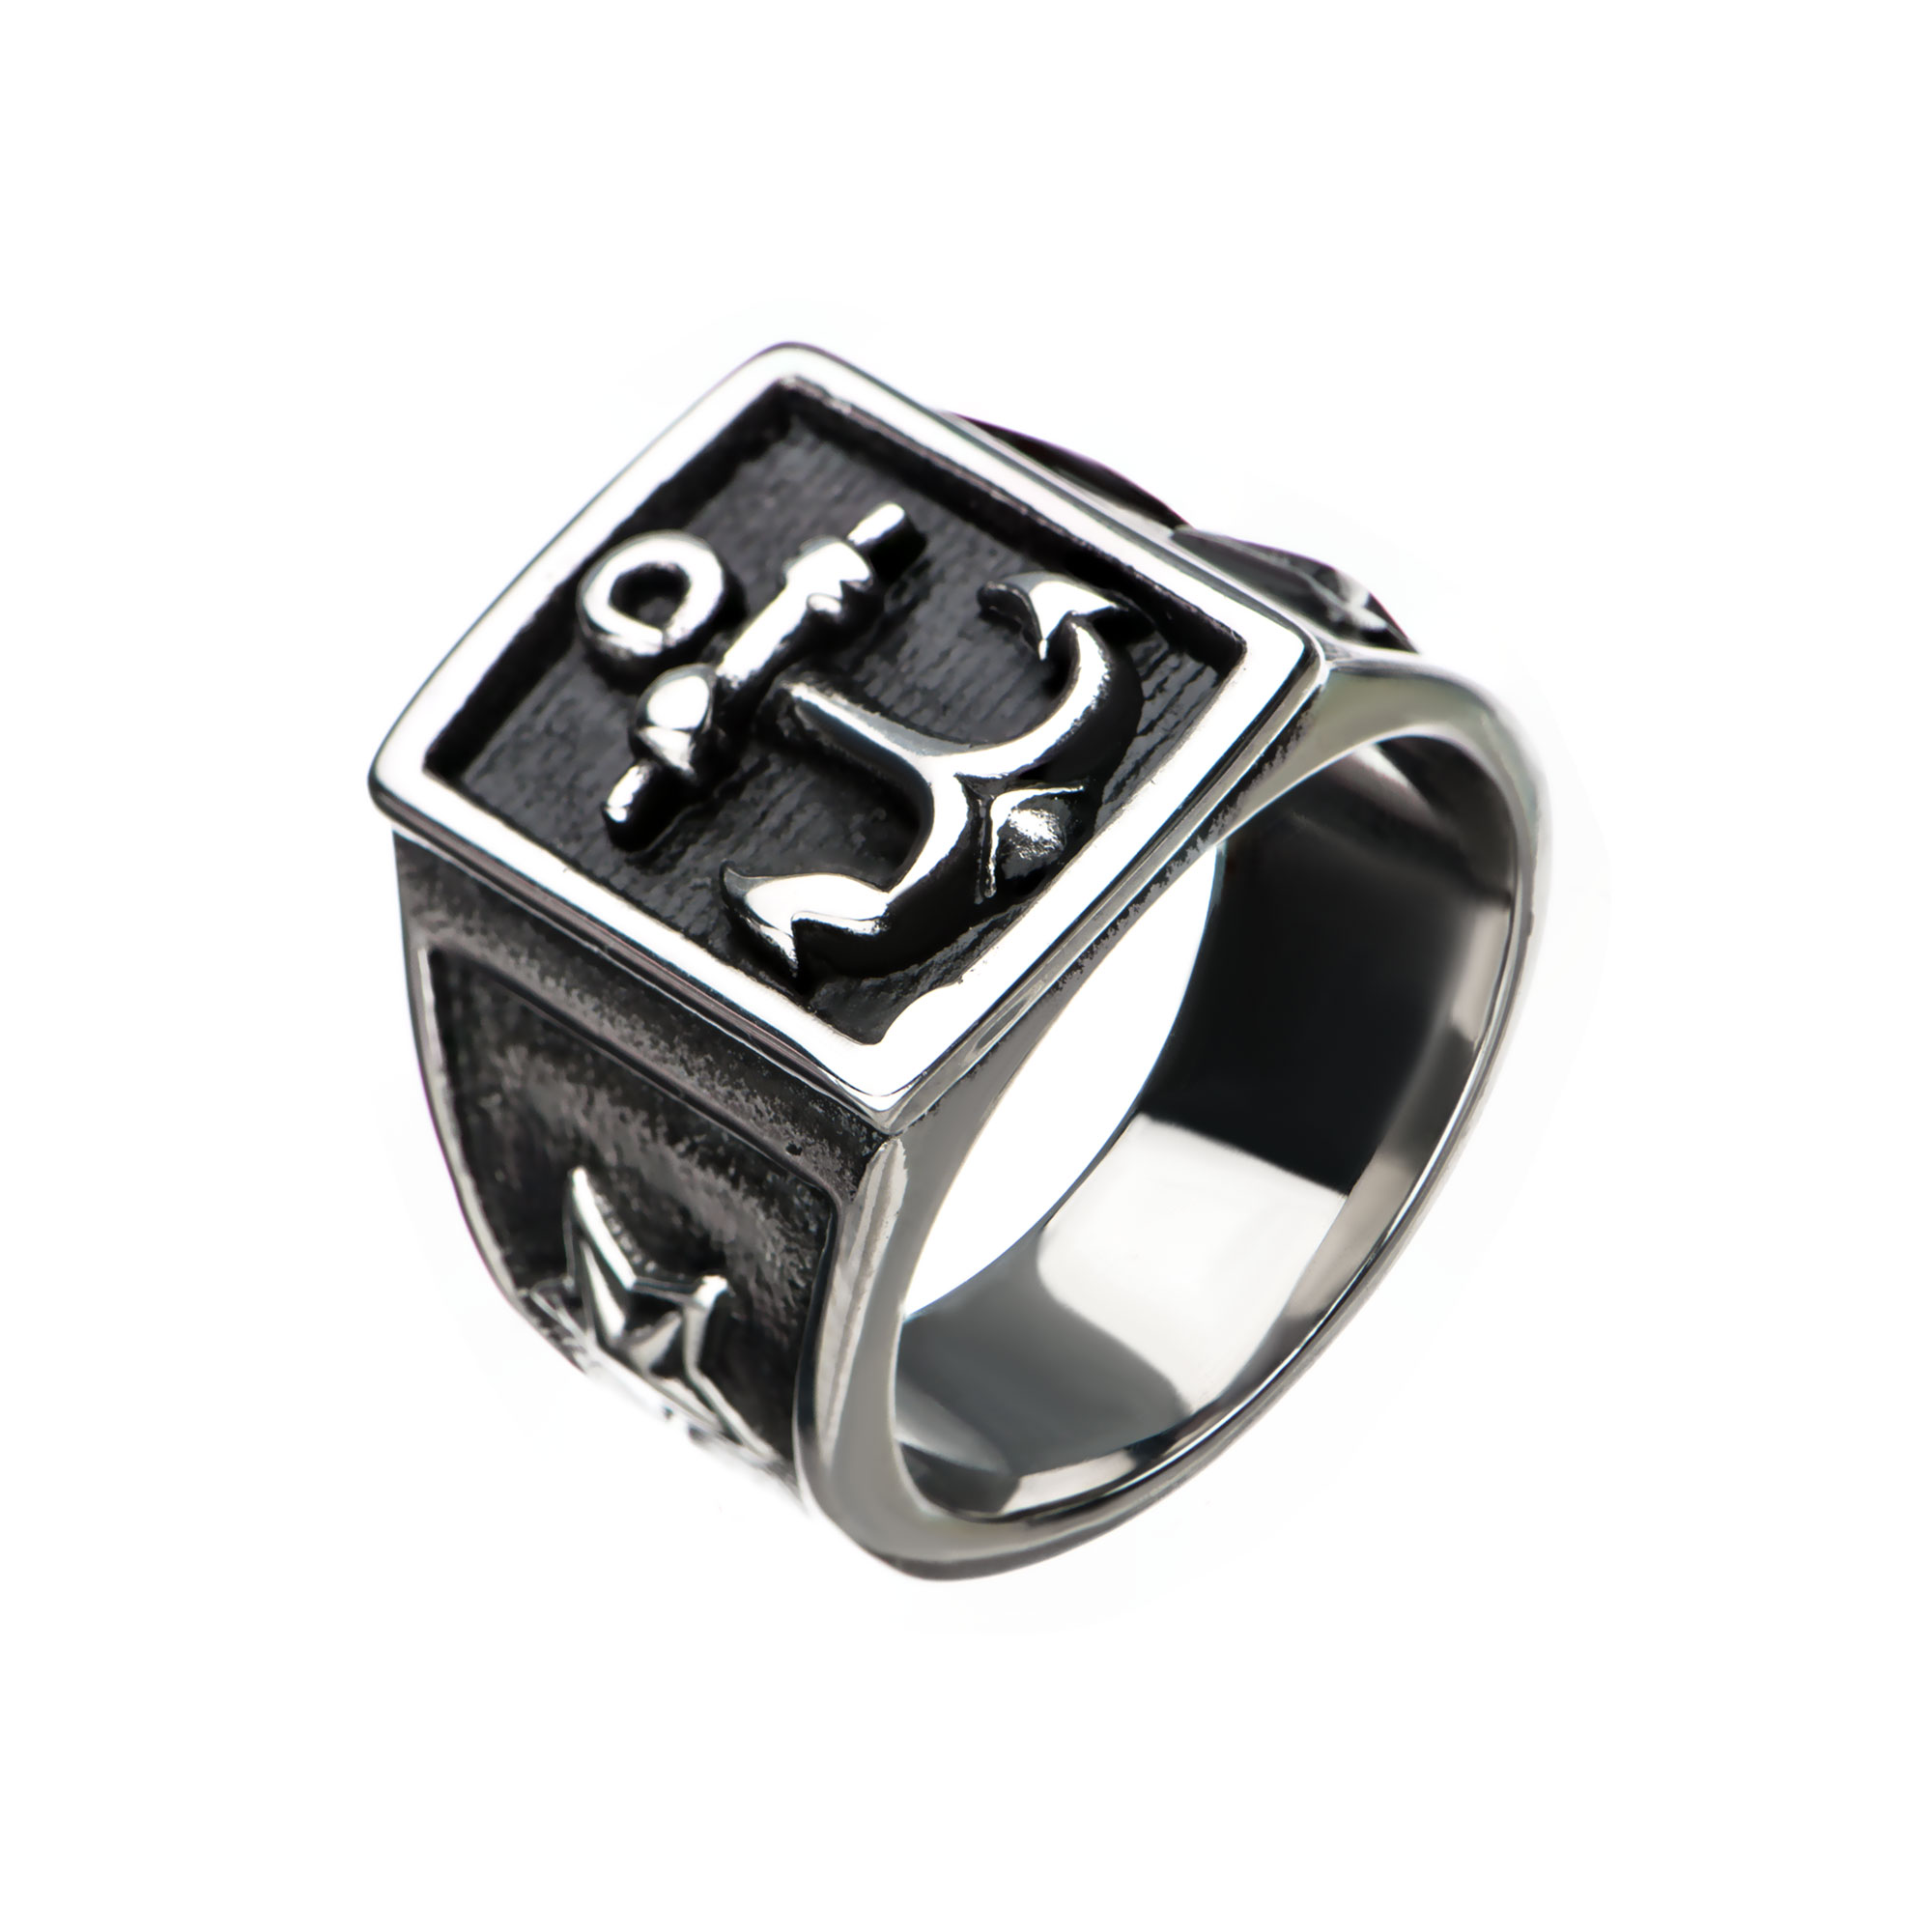 Steel & Black Plated Oxidized Anchor Signet Ring Morin Jewelers Southbridge, MA